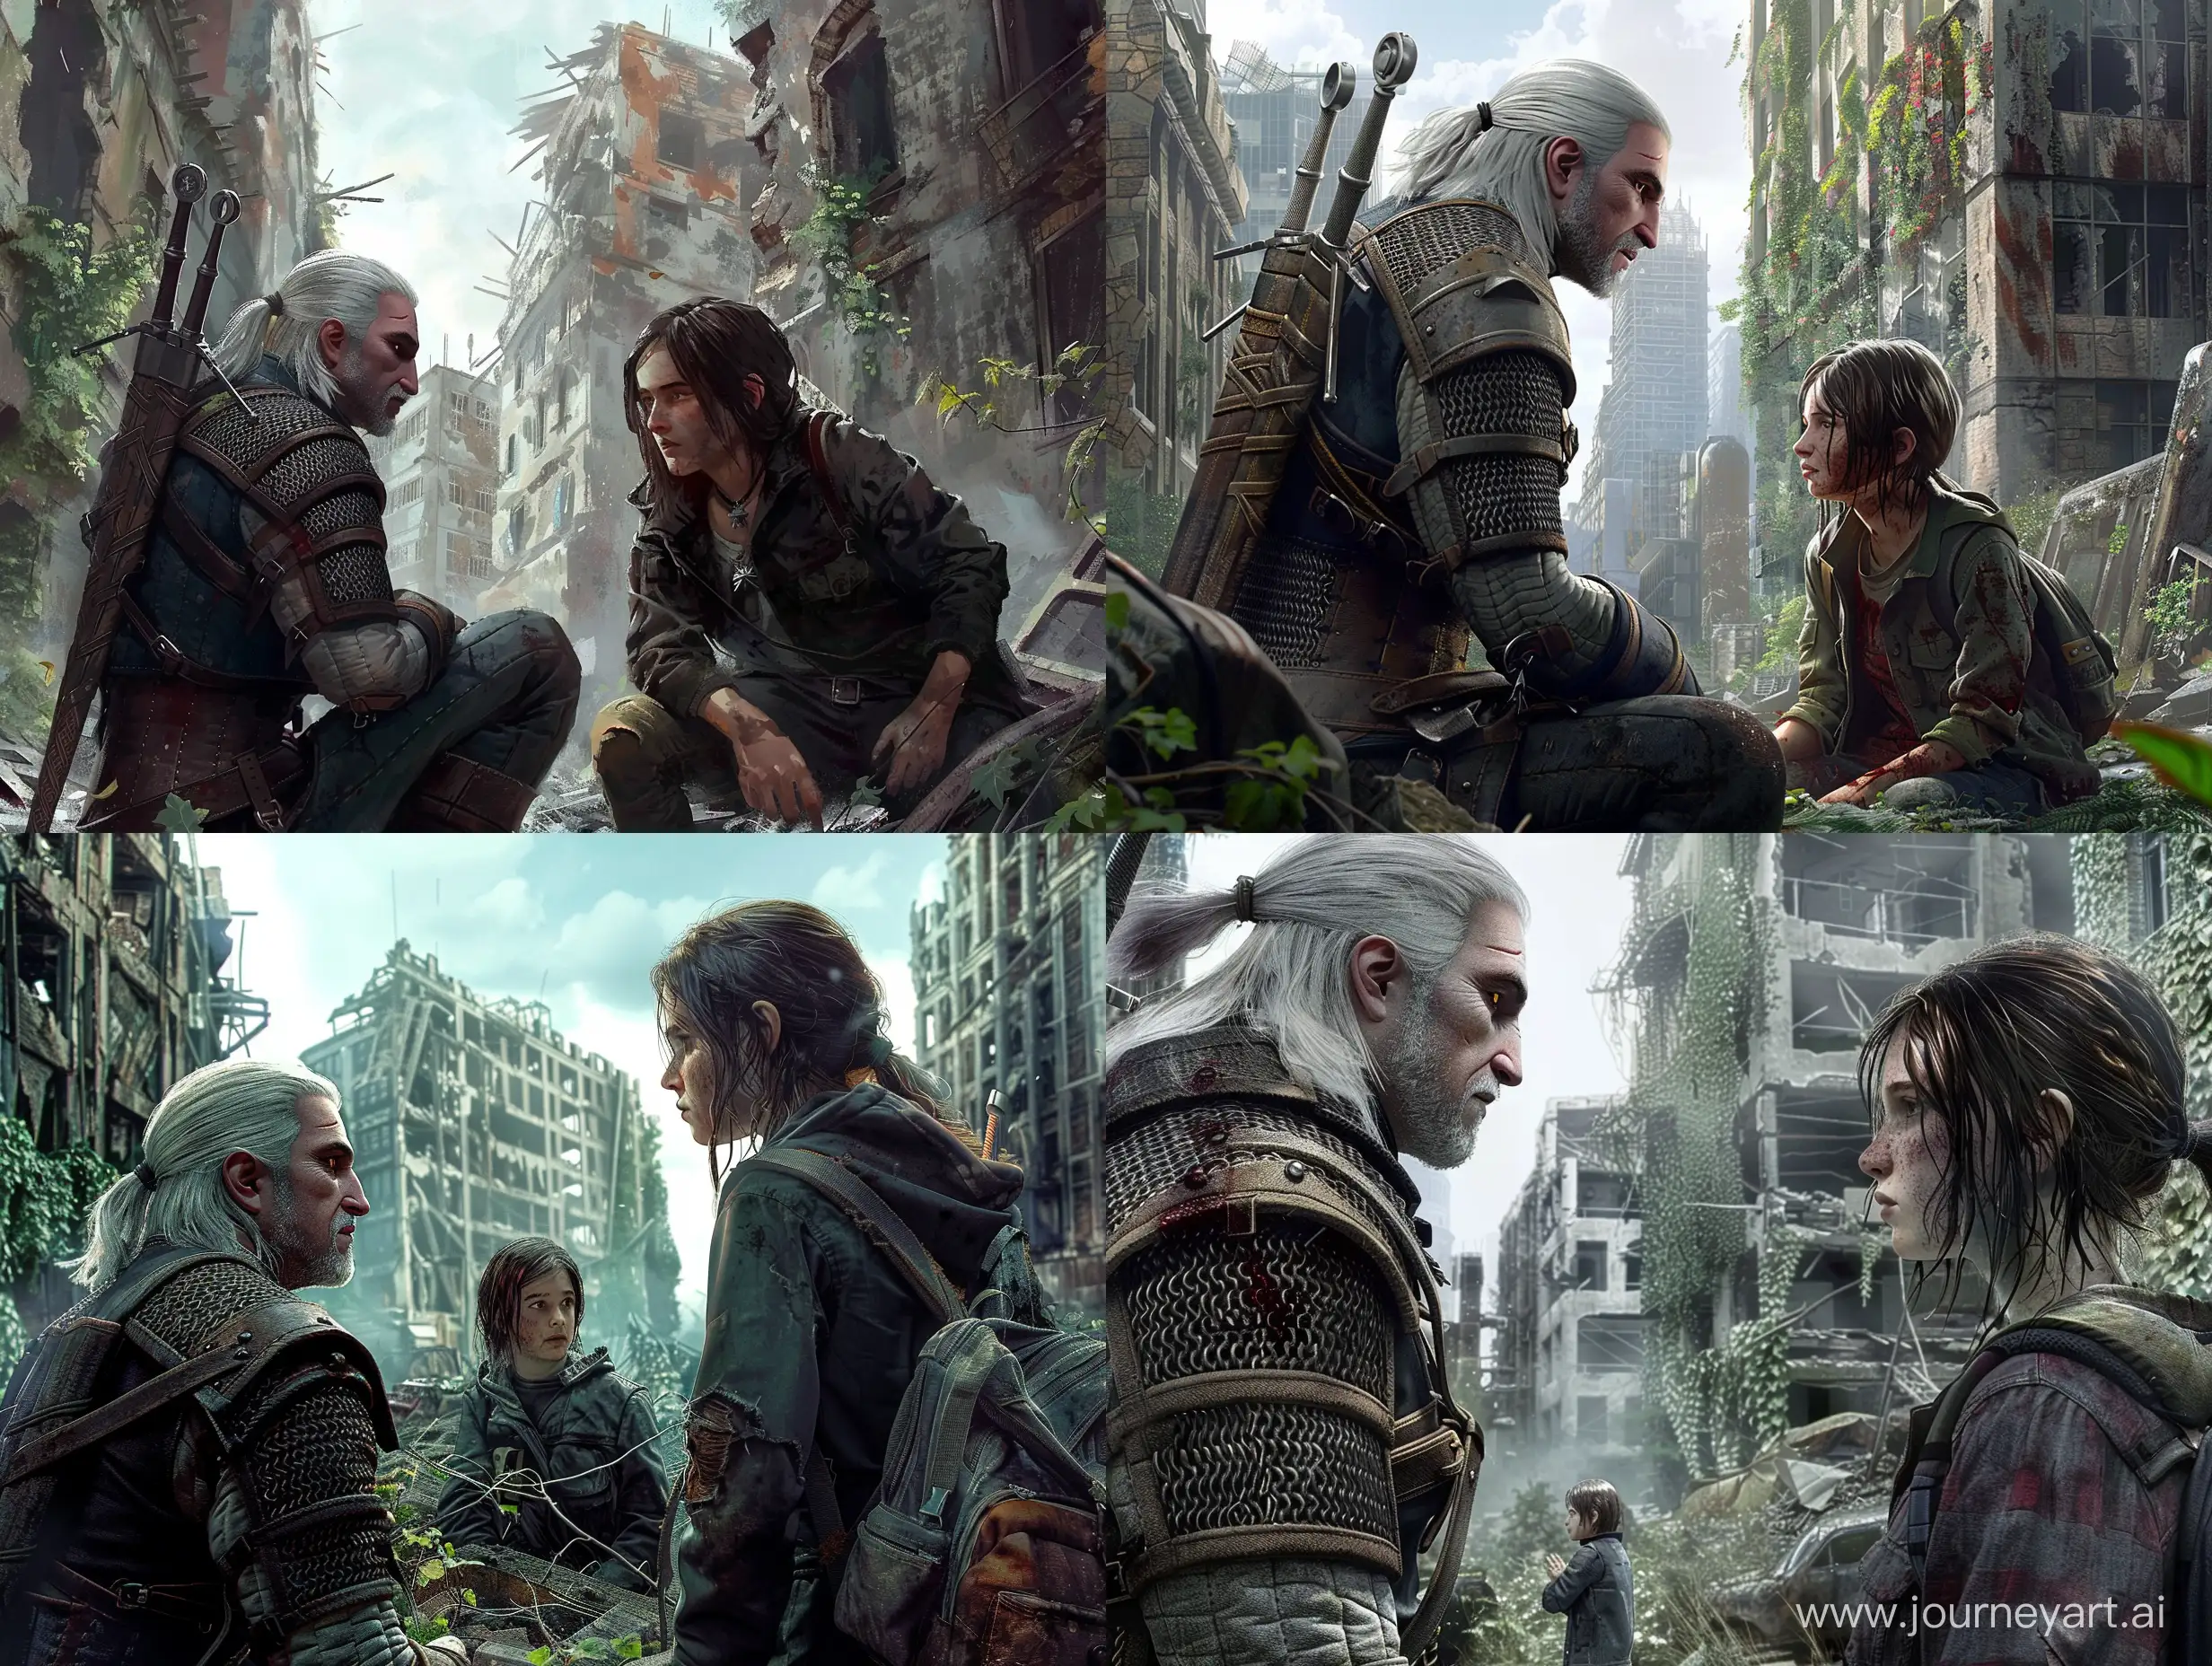 Geralt-of-Rivia-and-Joel-and-Ellie-Encounter-in-PostApocalyptic-City-Ruins